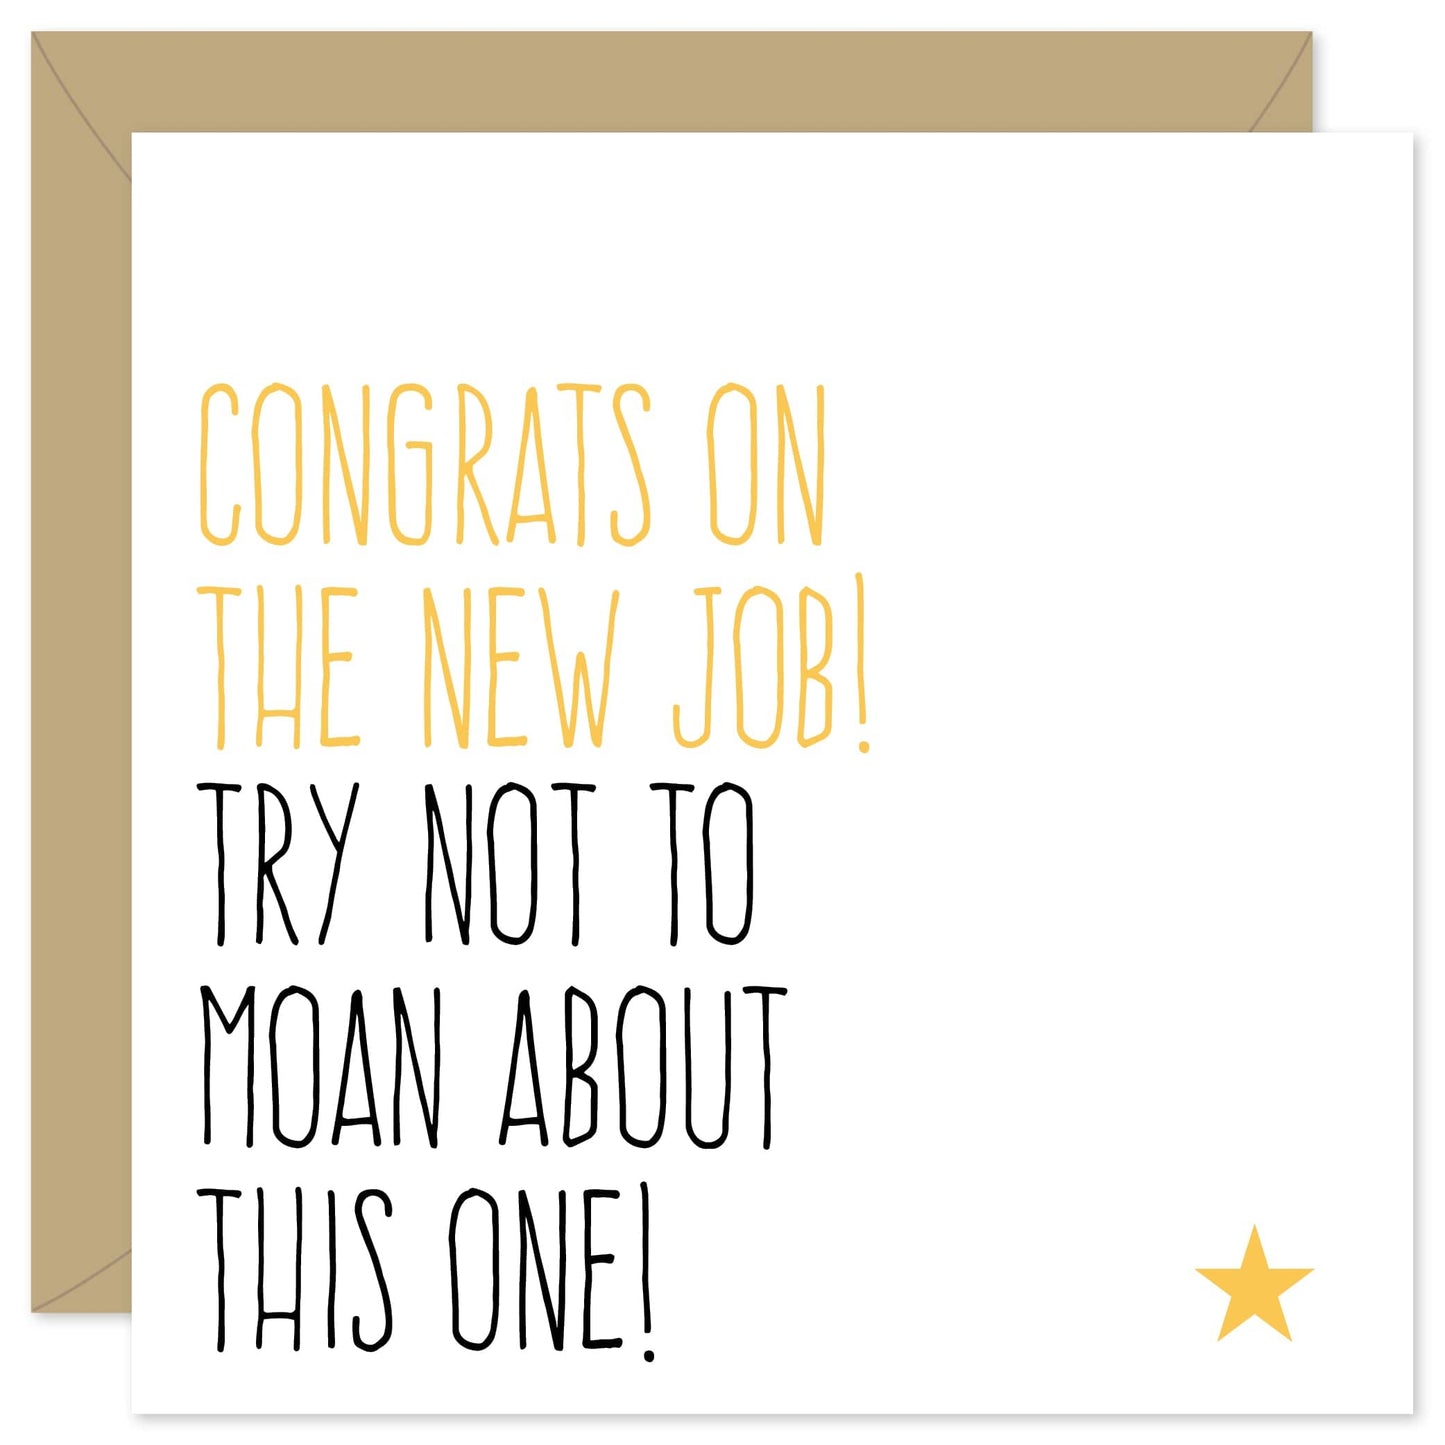 Congrats on the new job card from Purple Tree Designs